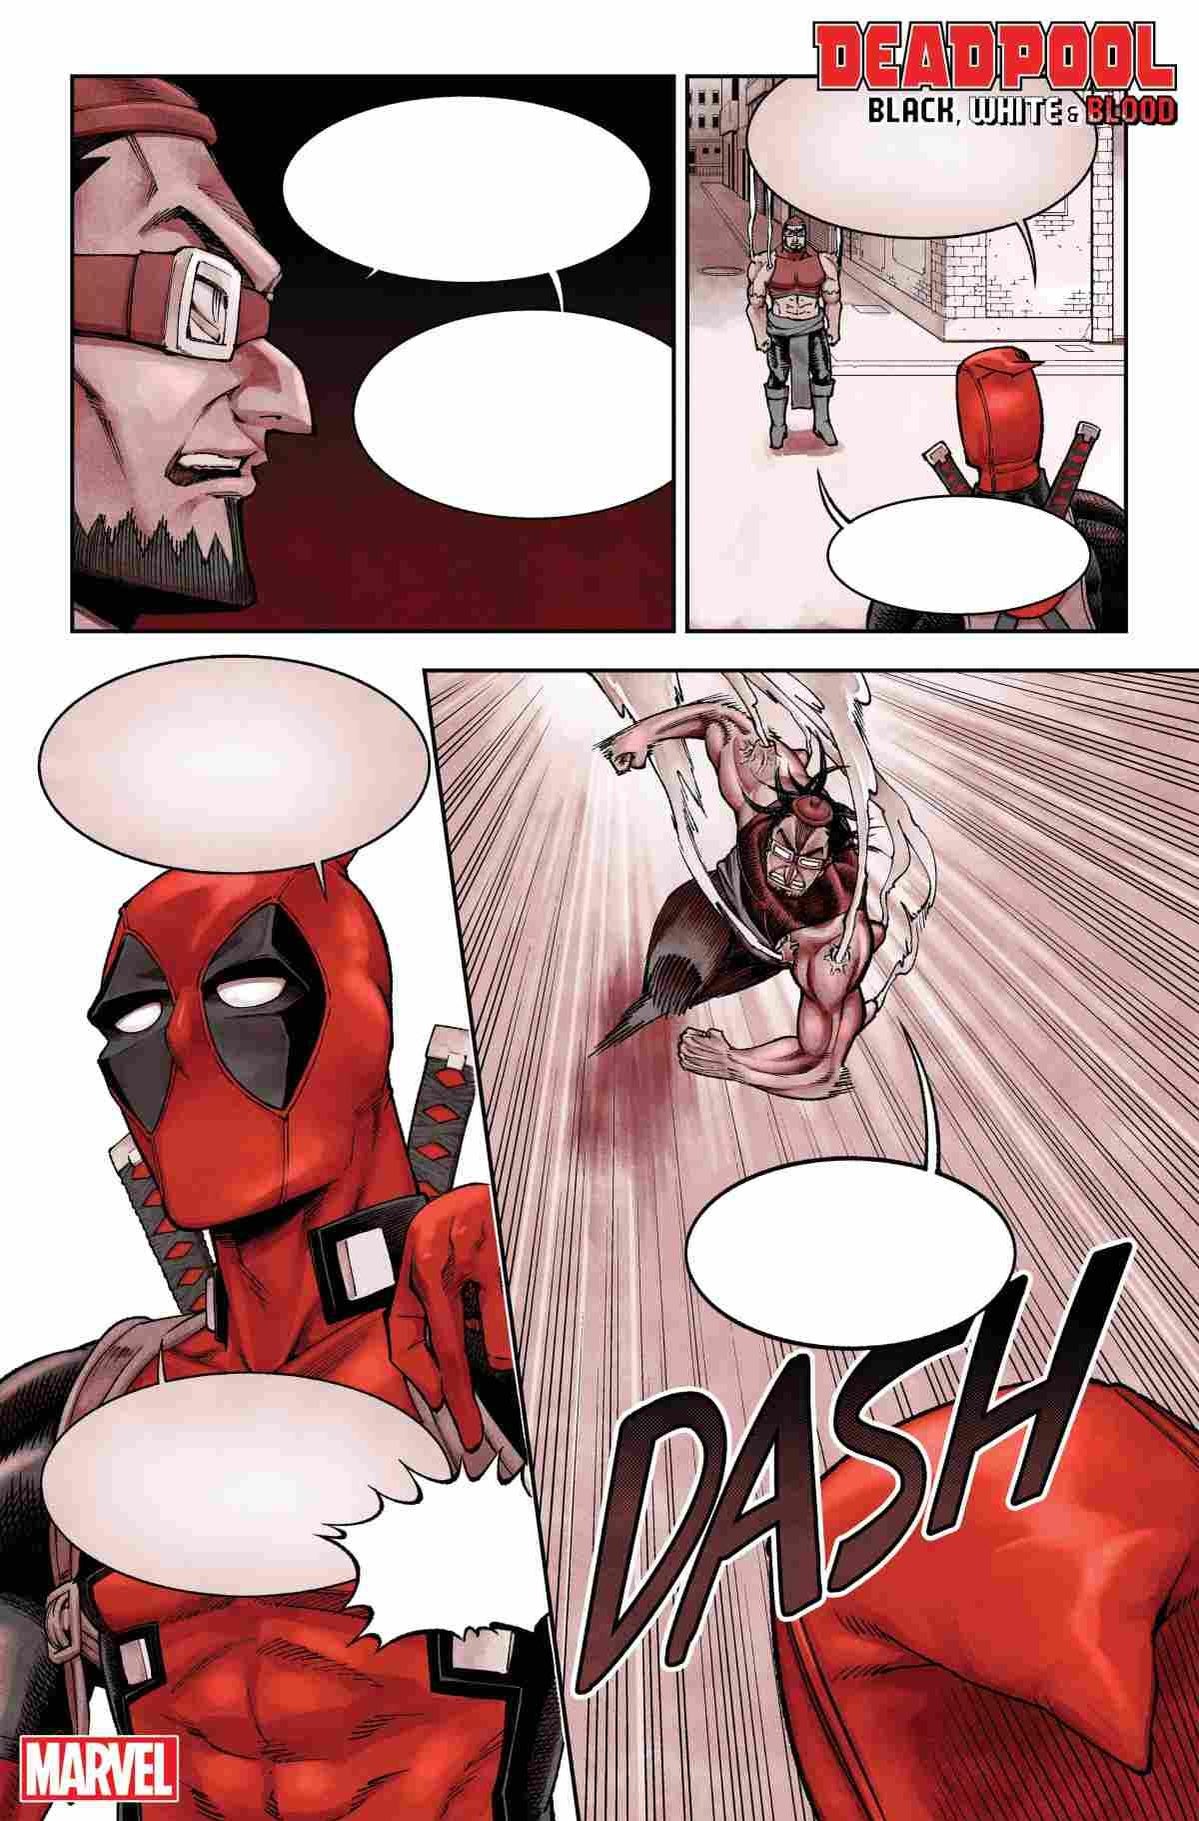 deadpool-black-white-and-blood-4-preview-page-2.jpg